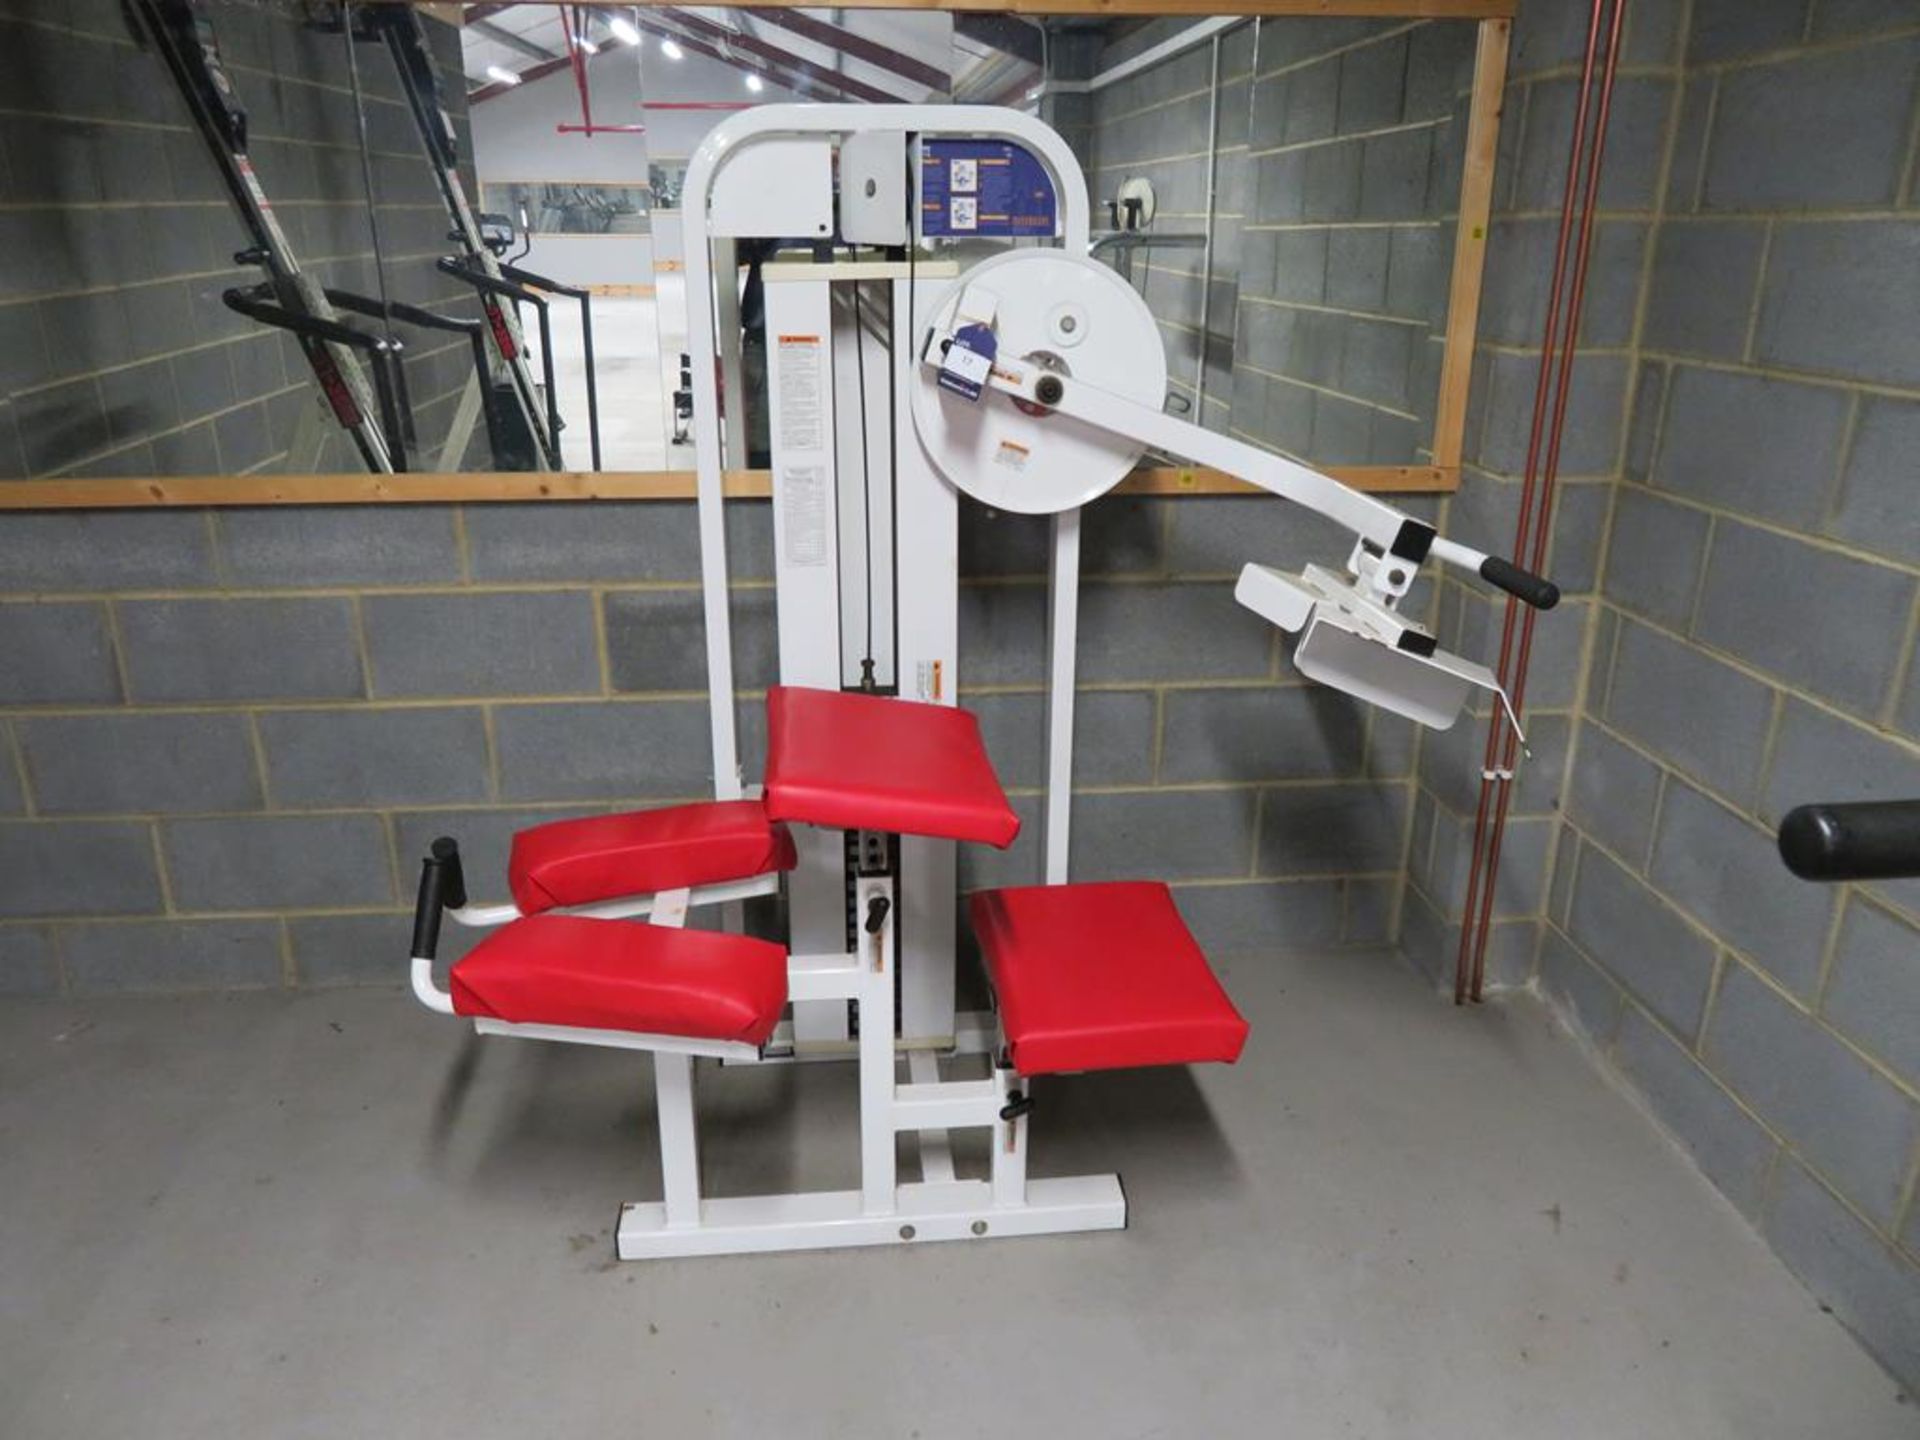 A Paramount Model 1300 Glute Exercising machine